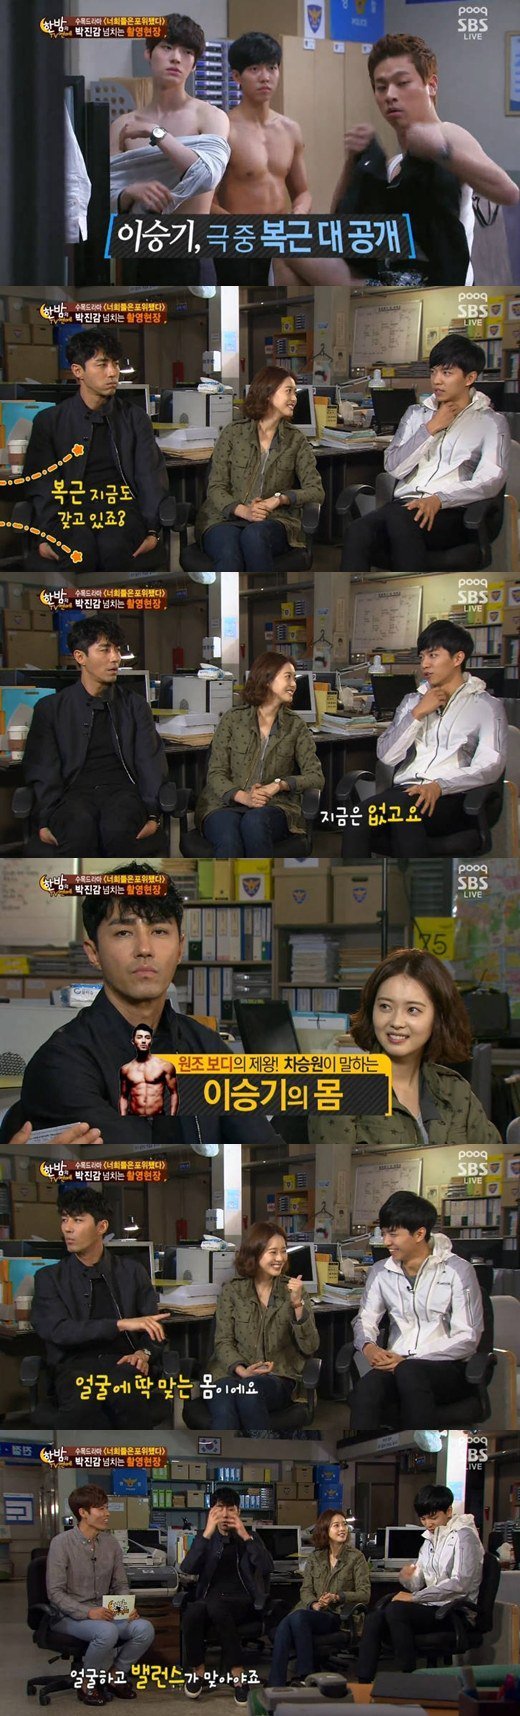 &quot;TV News At Night&quot; Cha Seung-won compliments Lee Seung-gi's abs